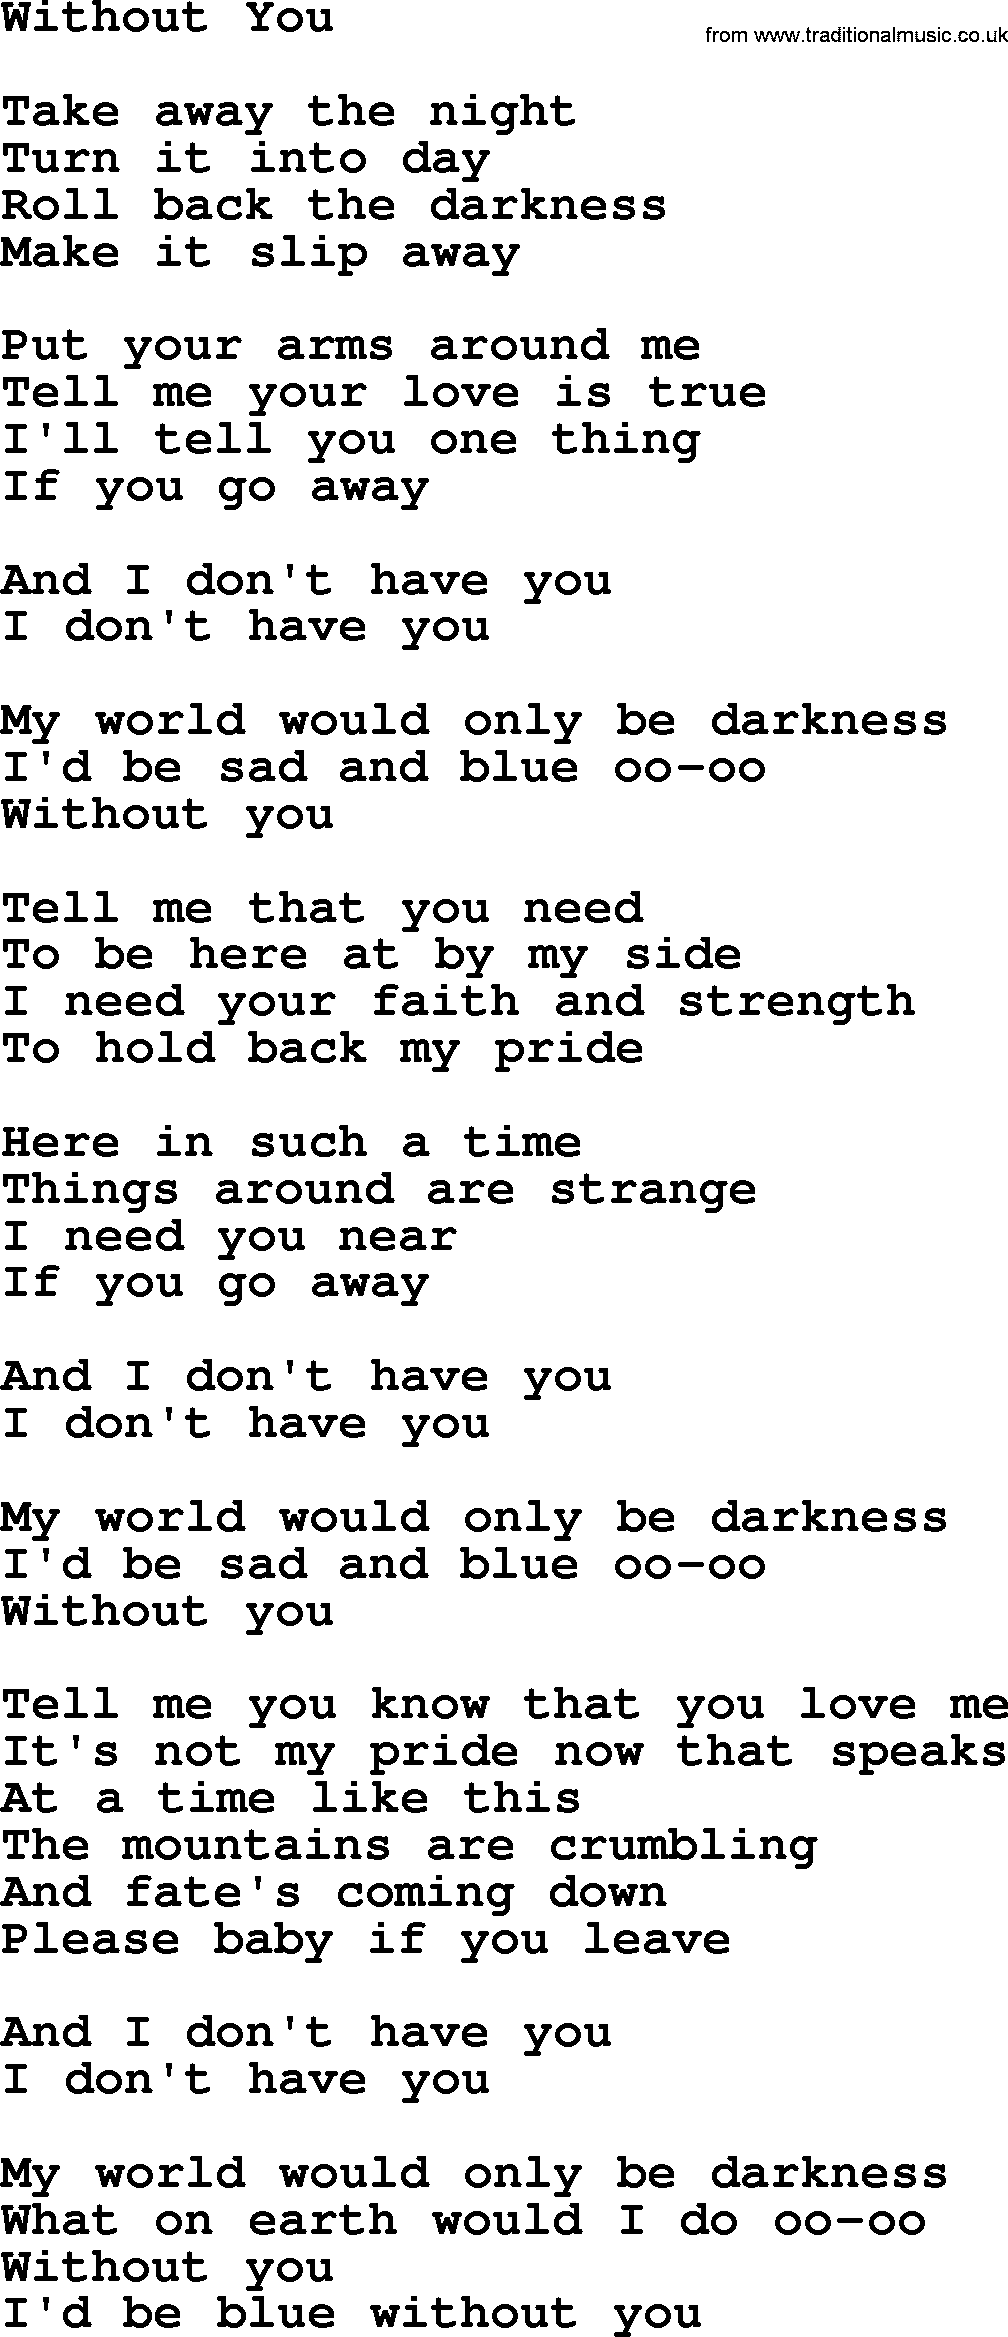 The Byrds song Without You, lyrics